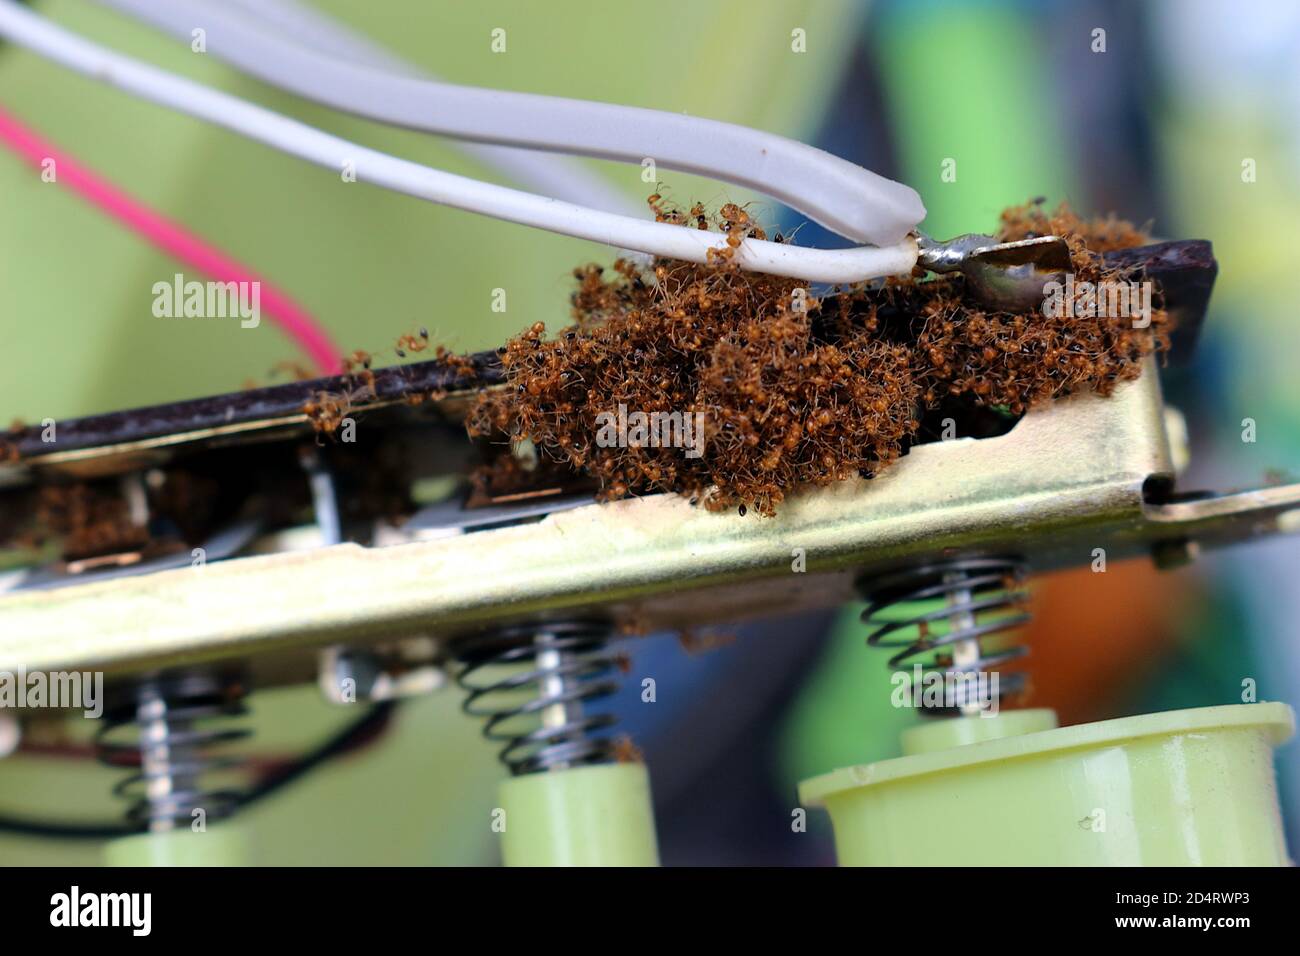 The remains of dead ants were clustered together in the fan switch. Stock Photo